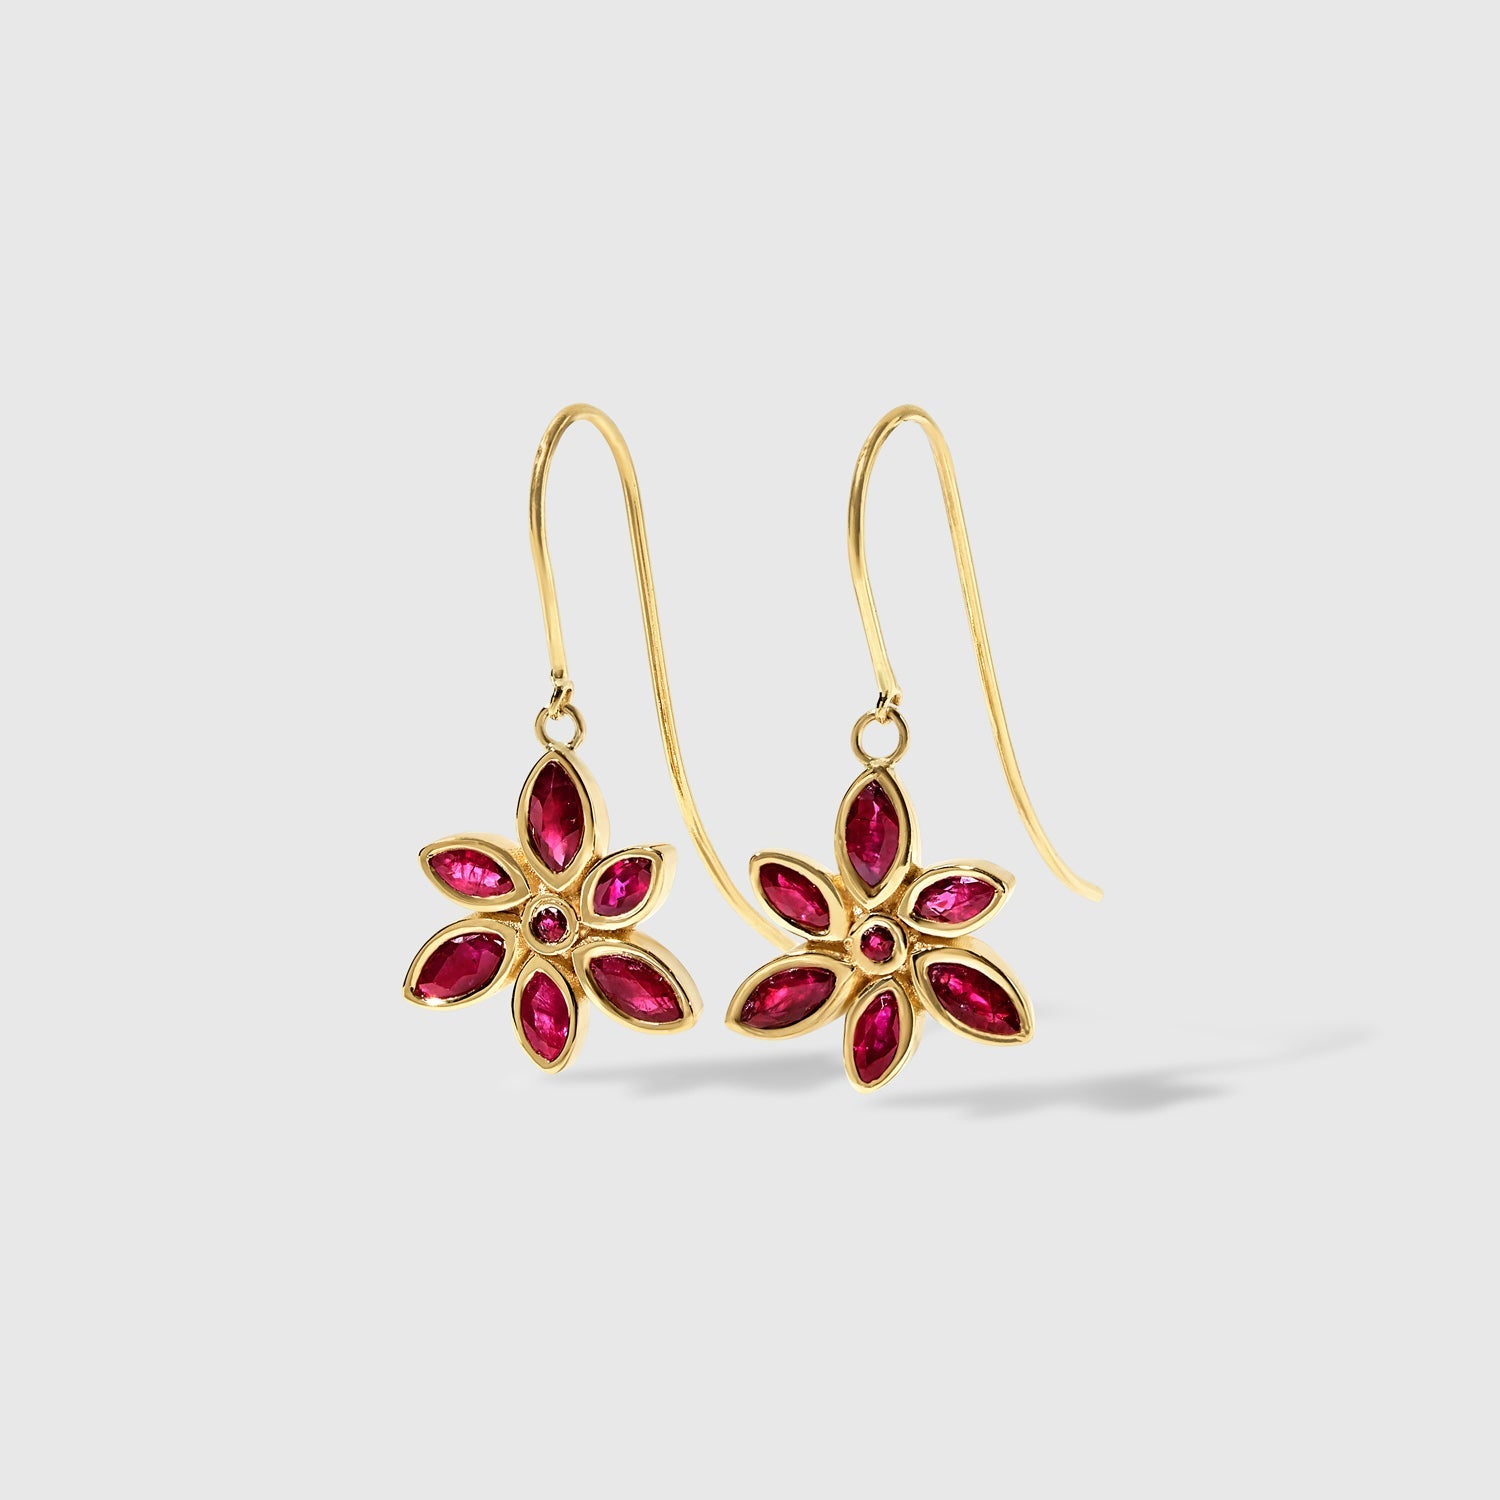 Maria - Ruby Flower Dangle Earrings – La Fleur Rouge Collection of Rubies & Solid Gold - Aurora Laffite Jewelry